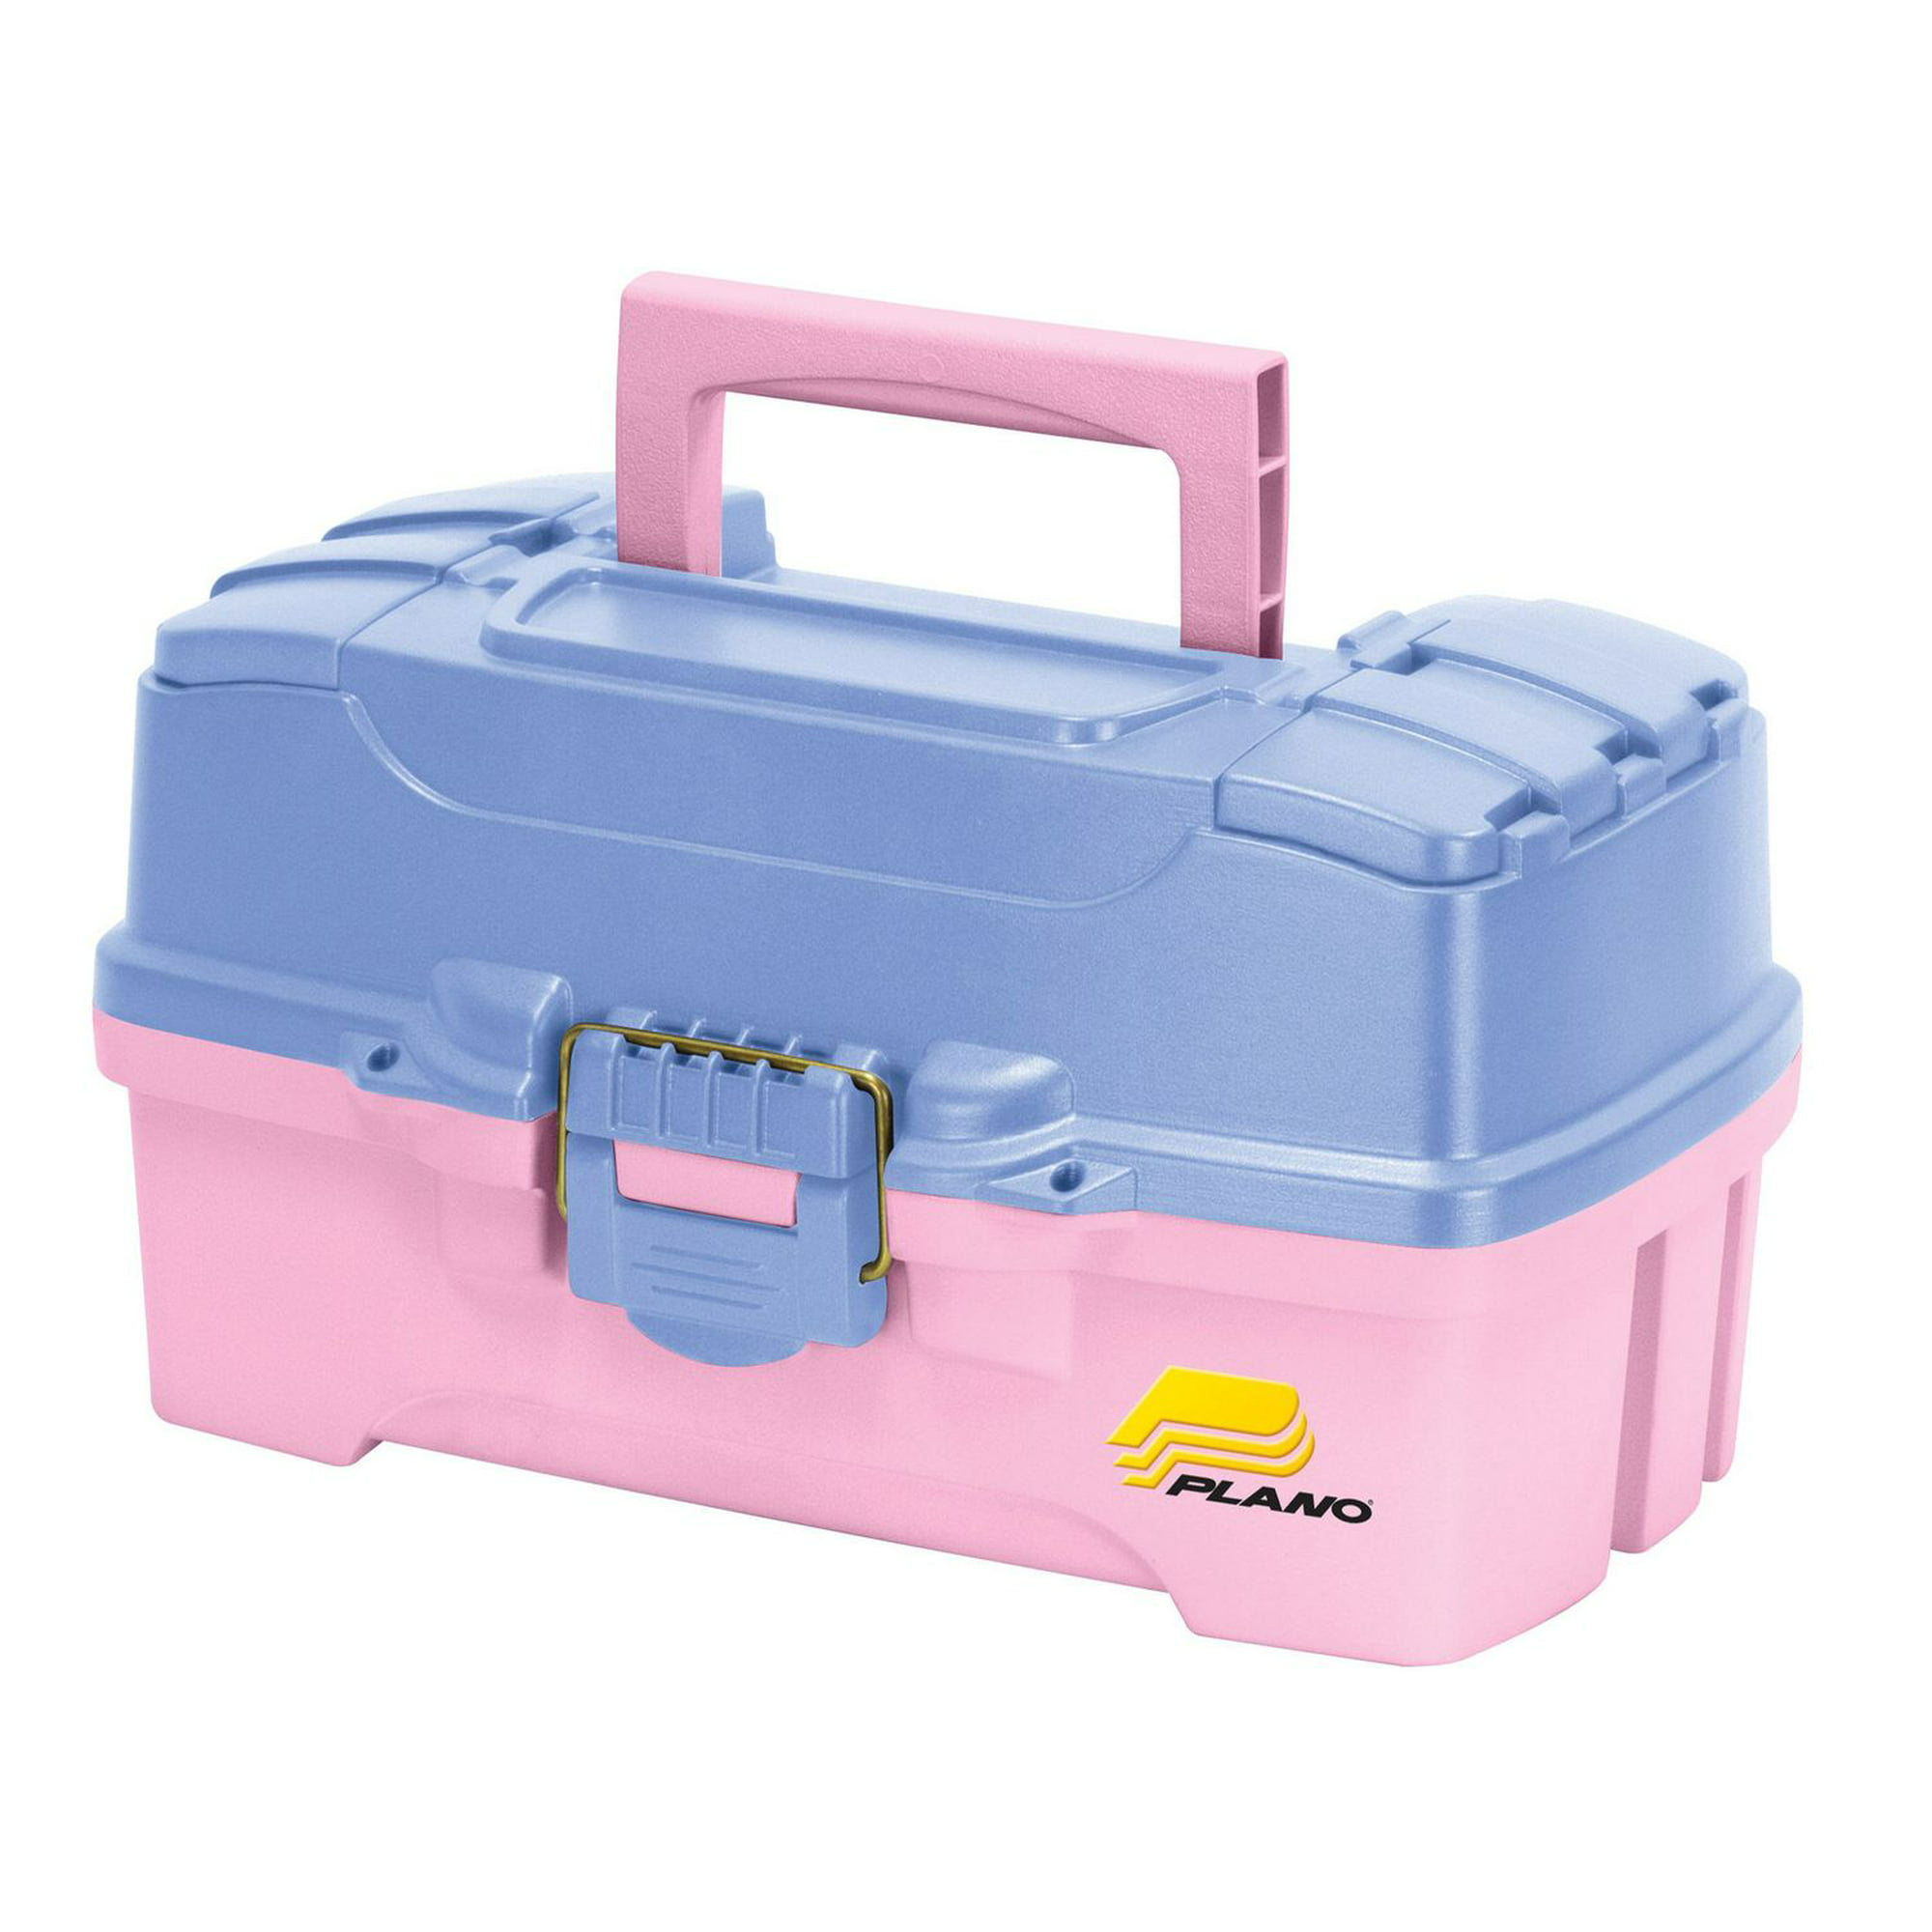 Plano Two-Tray Tackle Box PINK/PERIWINKLE